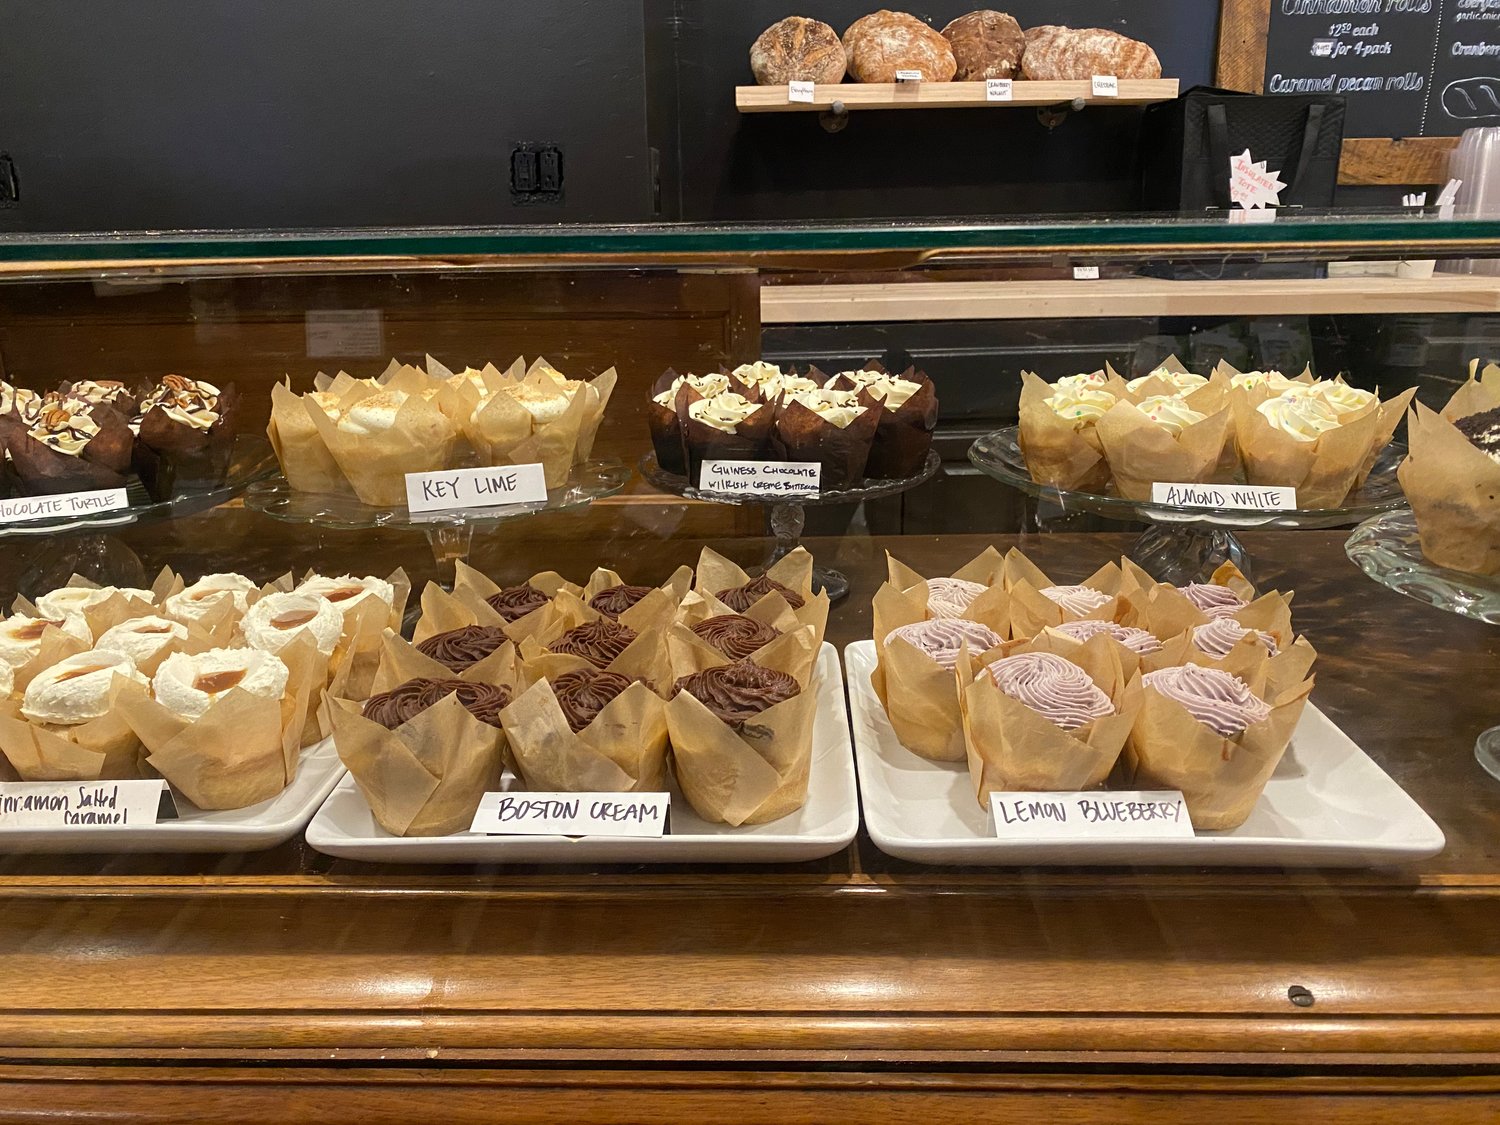 Scratch-made cupcakes at Best of Iowa are a community favorite.